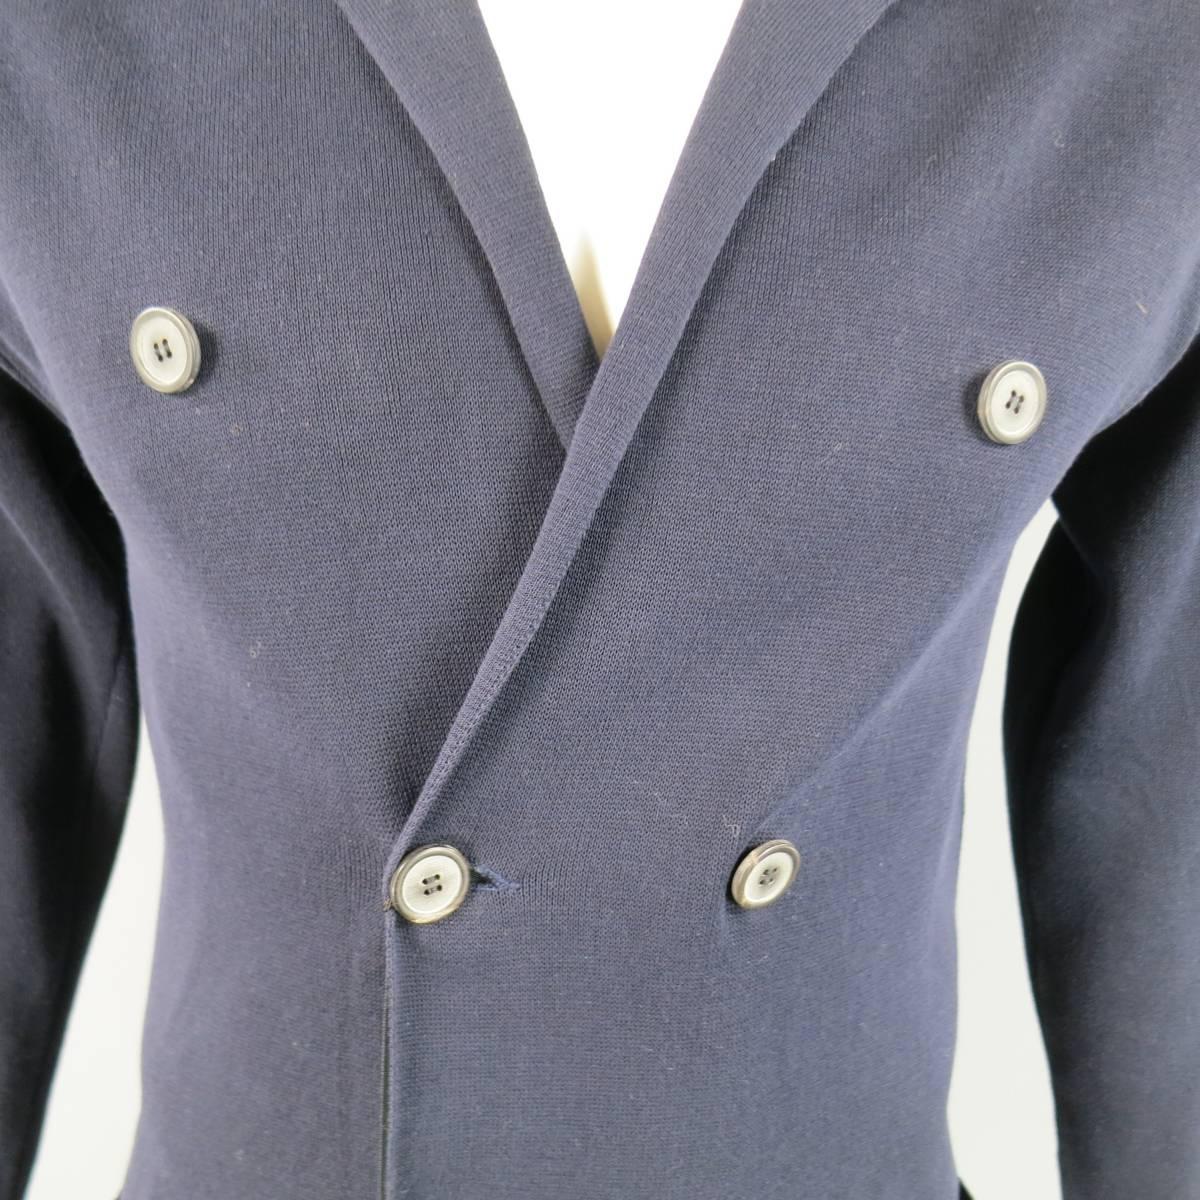 LANVIN cardigan jacket comes in a deep navy blue cotton knit and features a double breasted button up closure with ribbon liner, notch lapel, and double patch pockets. Made in Italy.
 
New with Tags.
Marked: L
 
Measurements:
 
Shoulder: 19